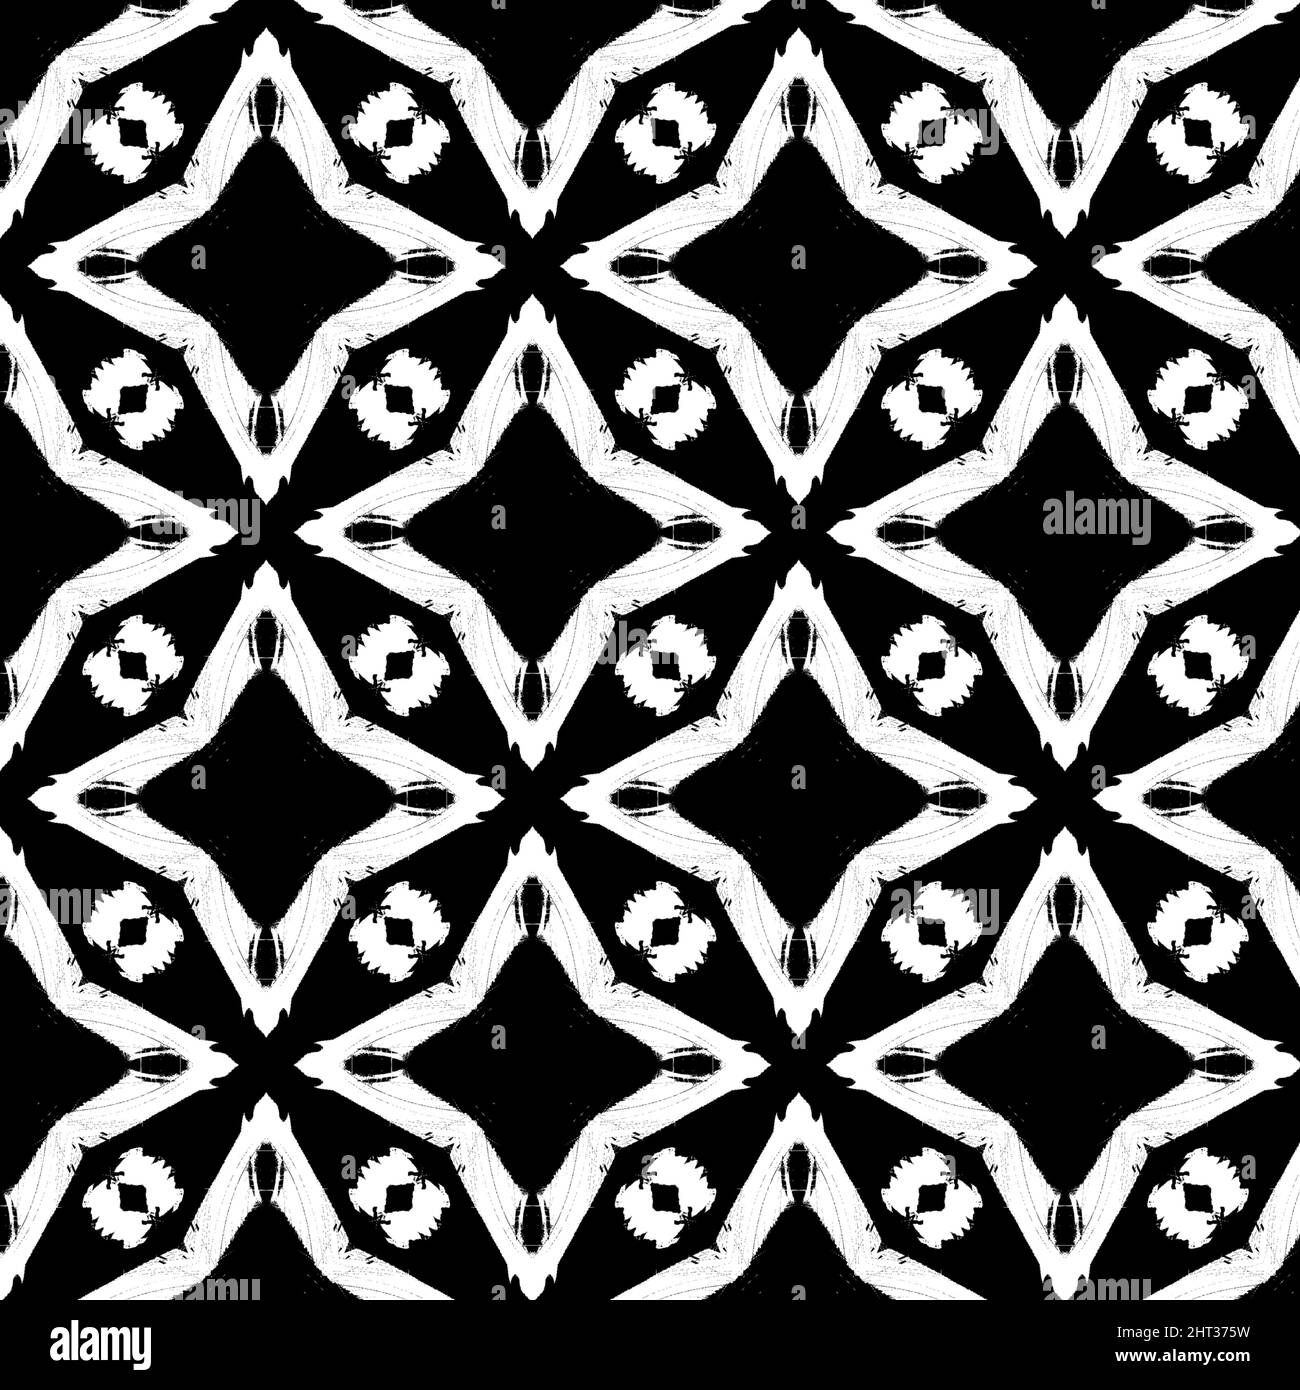 Illustration of a seamless star pattern of geometric shapes isolated on a black background Stock Photo